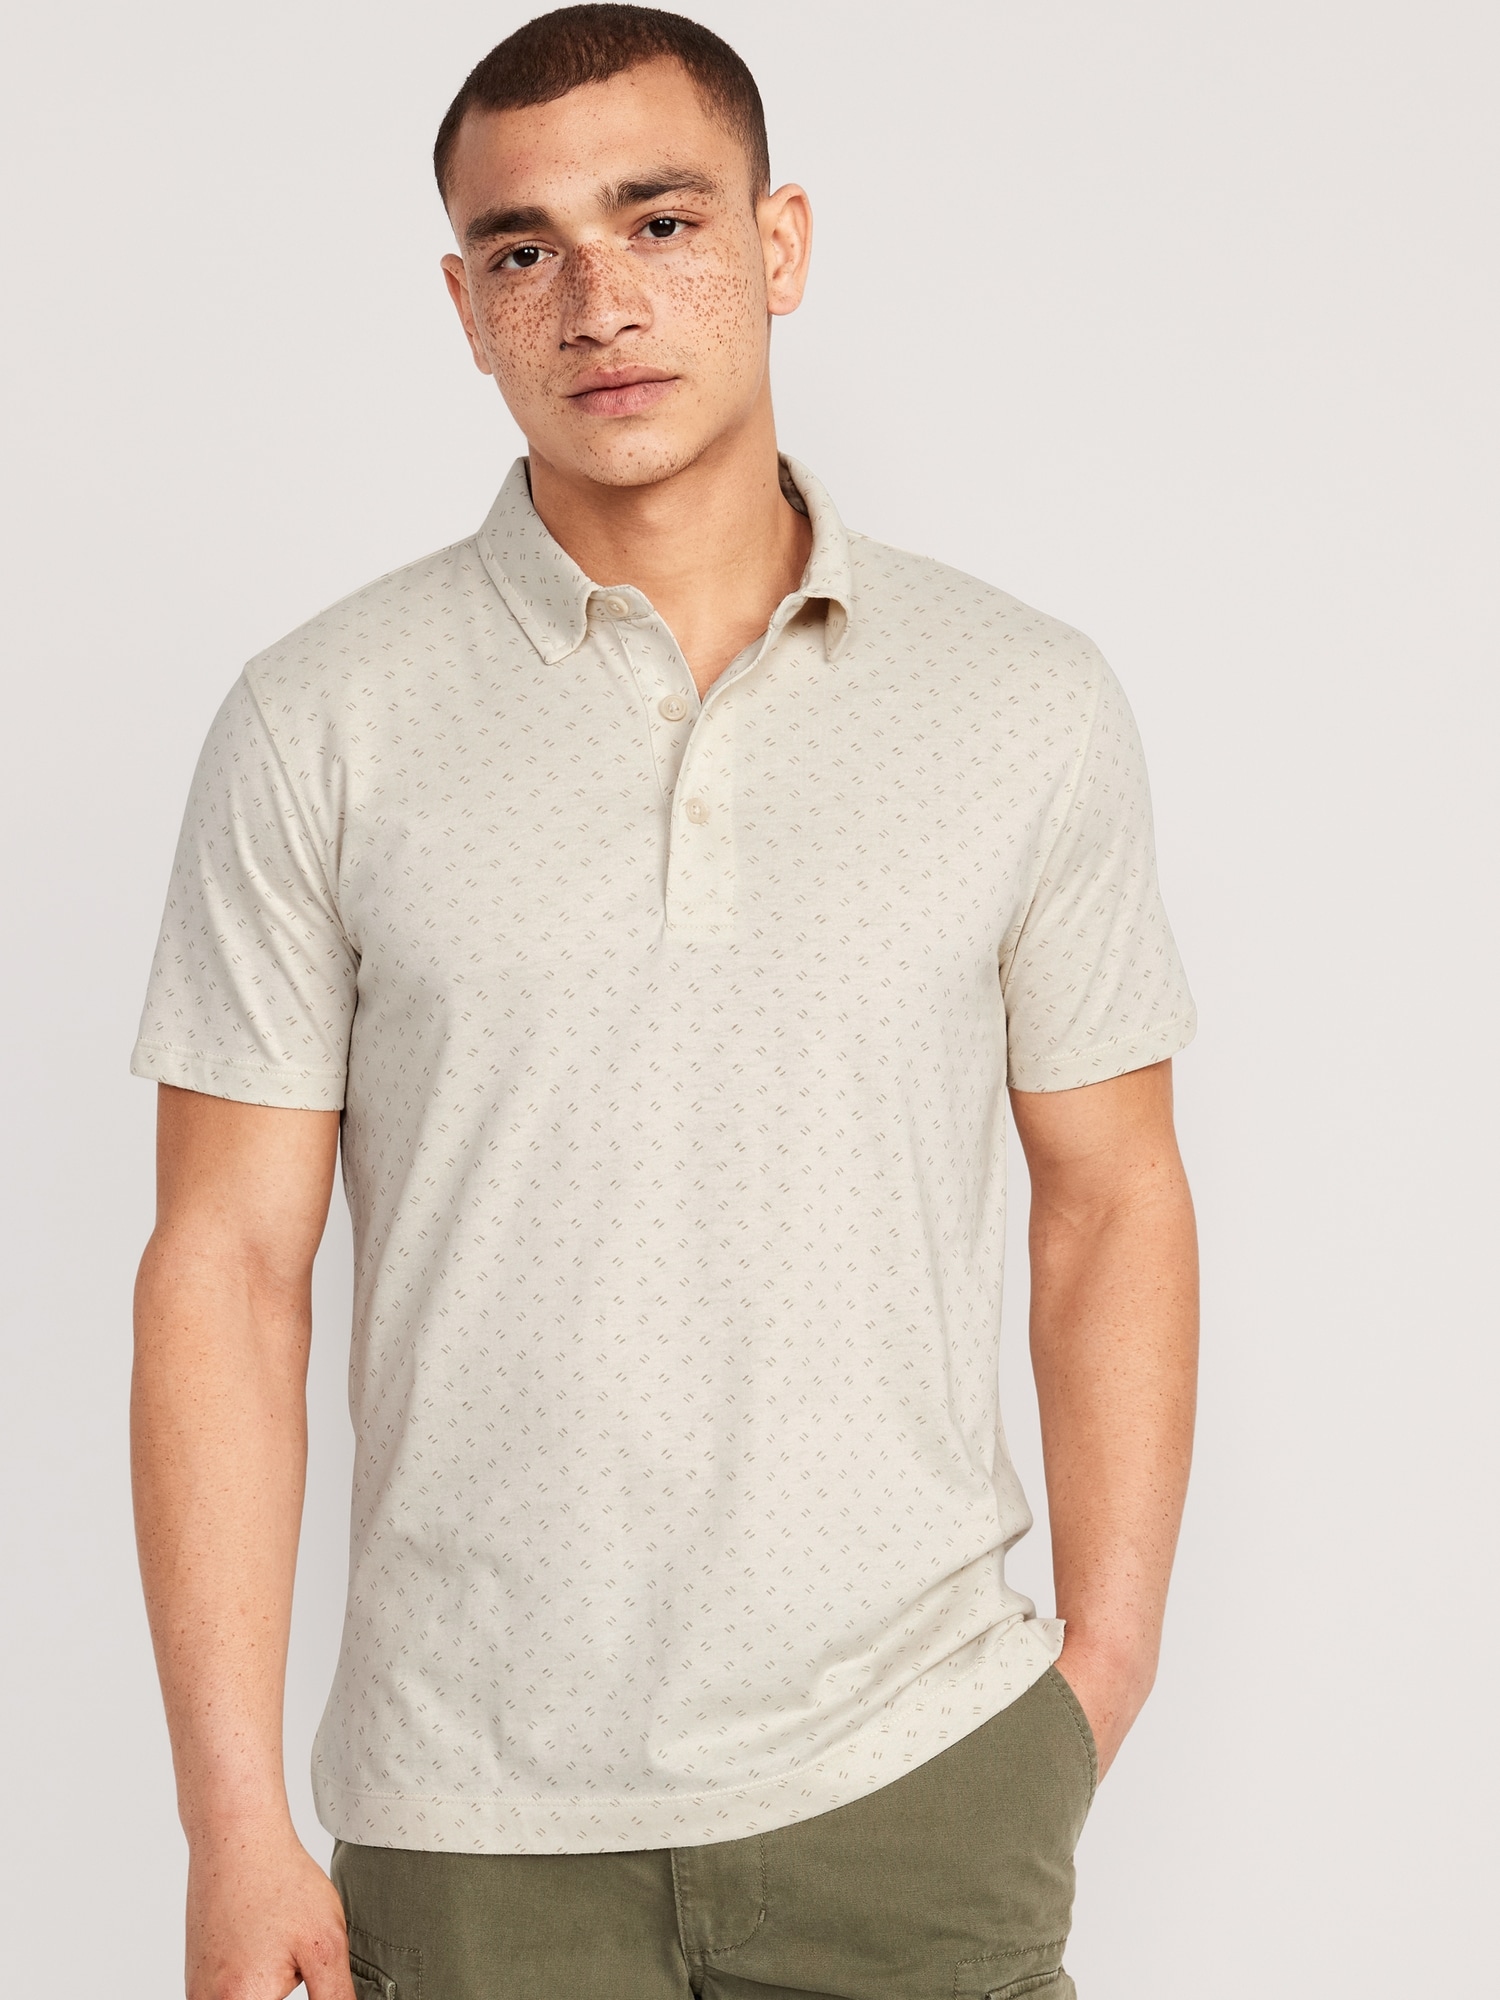 Old Navy Printed Classic Fit Jersey Polo for Men beige. 1